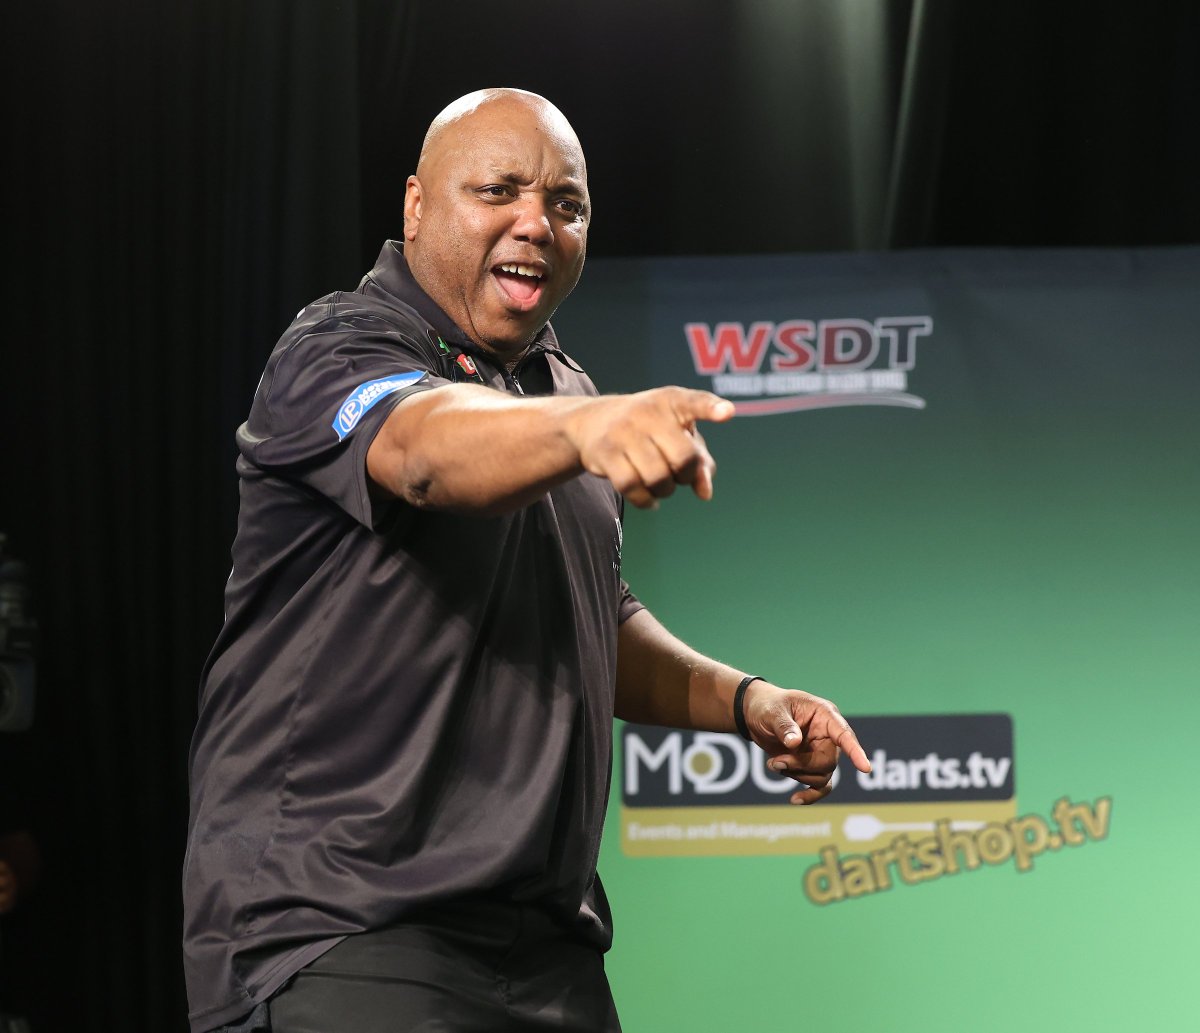 𝗚𝗔𝗧𝗘𝗦 𝗚𝗢𝗘𝗦 𝗕𝗔𝗖𝗞-𝗧𝗢-𝗕𝗔𝗖𝗞 🏆🏆

Leonard Gates claims his second successive World Seniors televised title courtesy of a dominant 6-2 victory over Richie Howson in the final of The Masters! 🇺🇸

#WorldSeniorsMasters